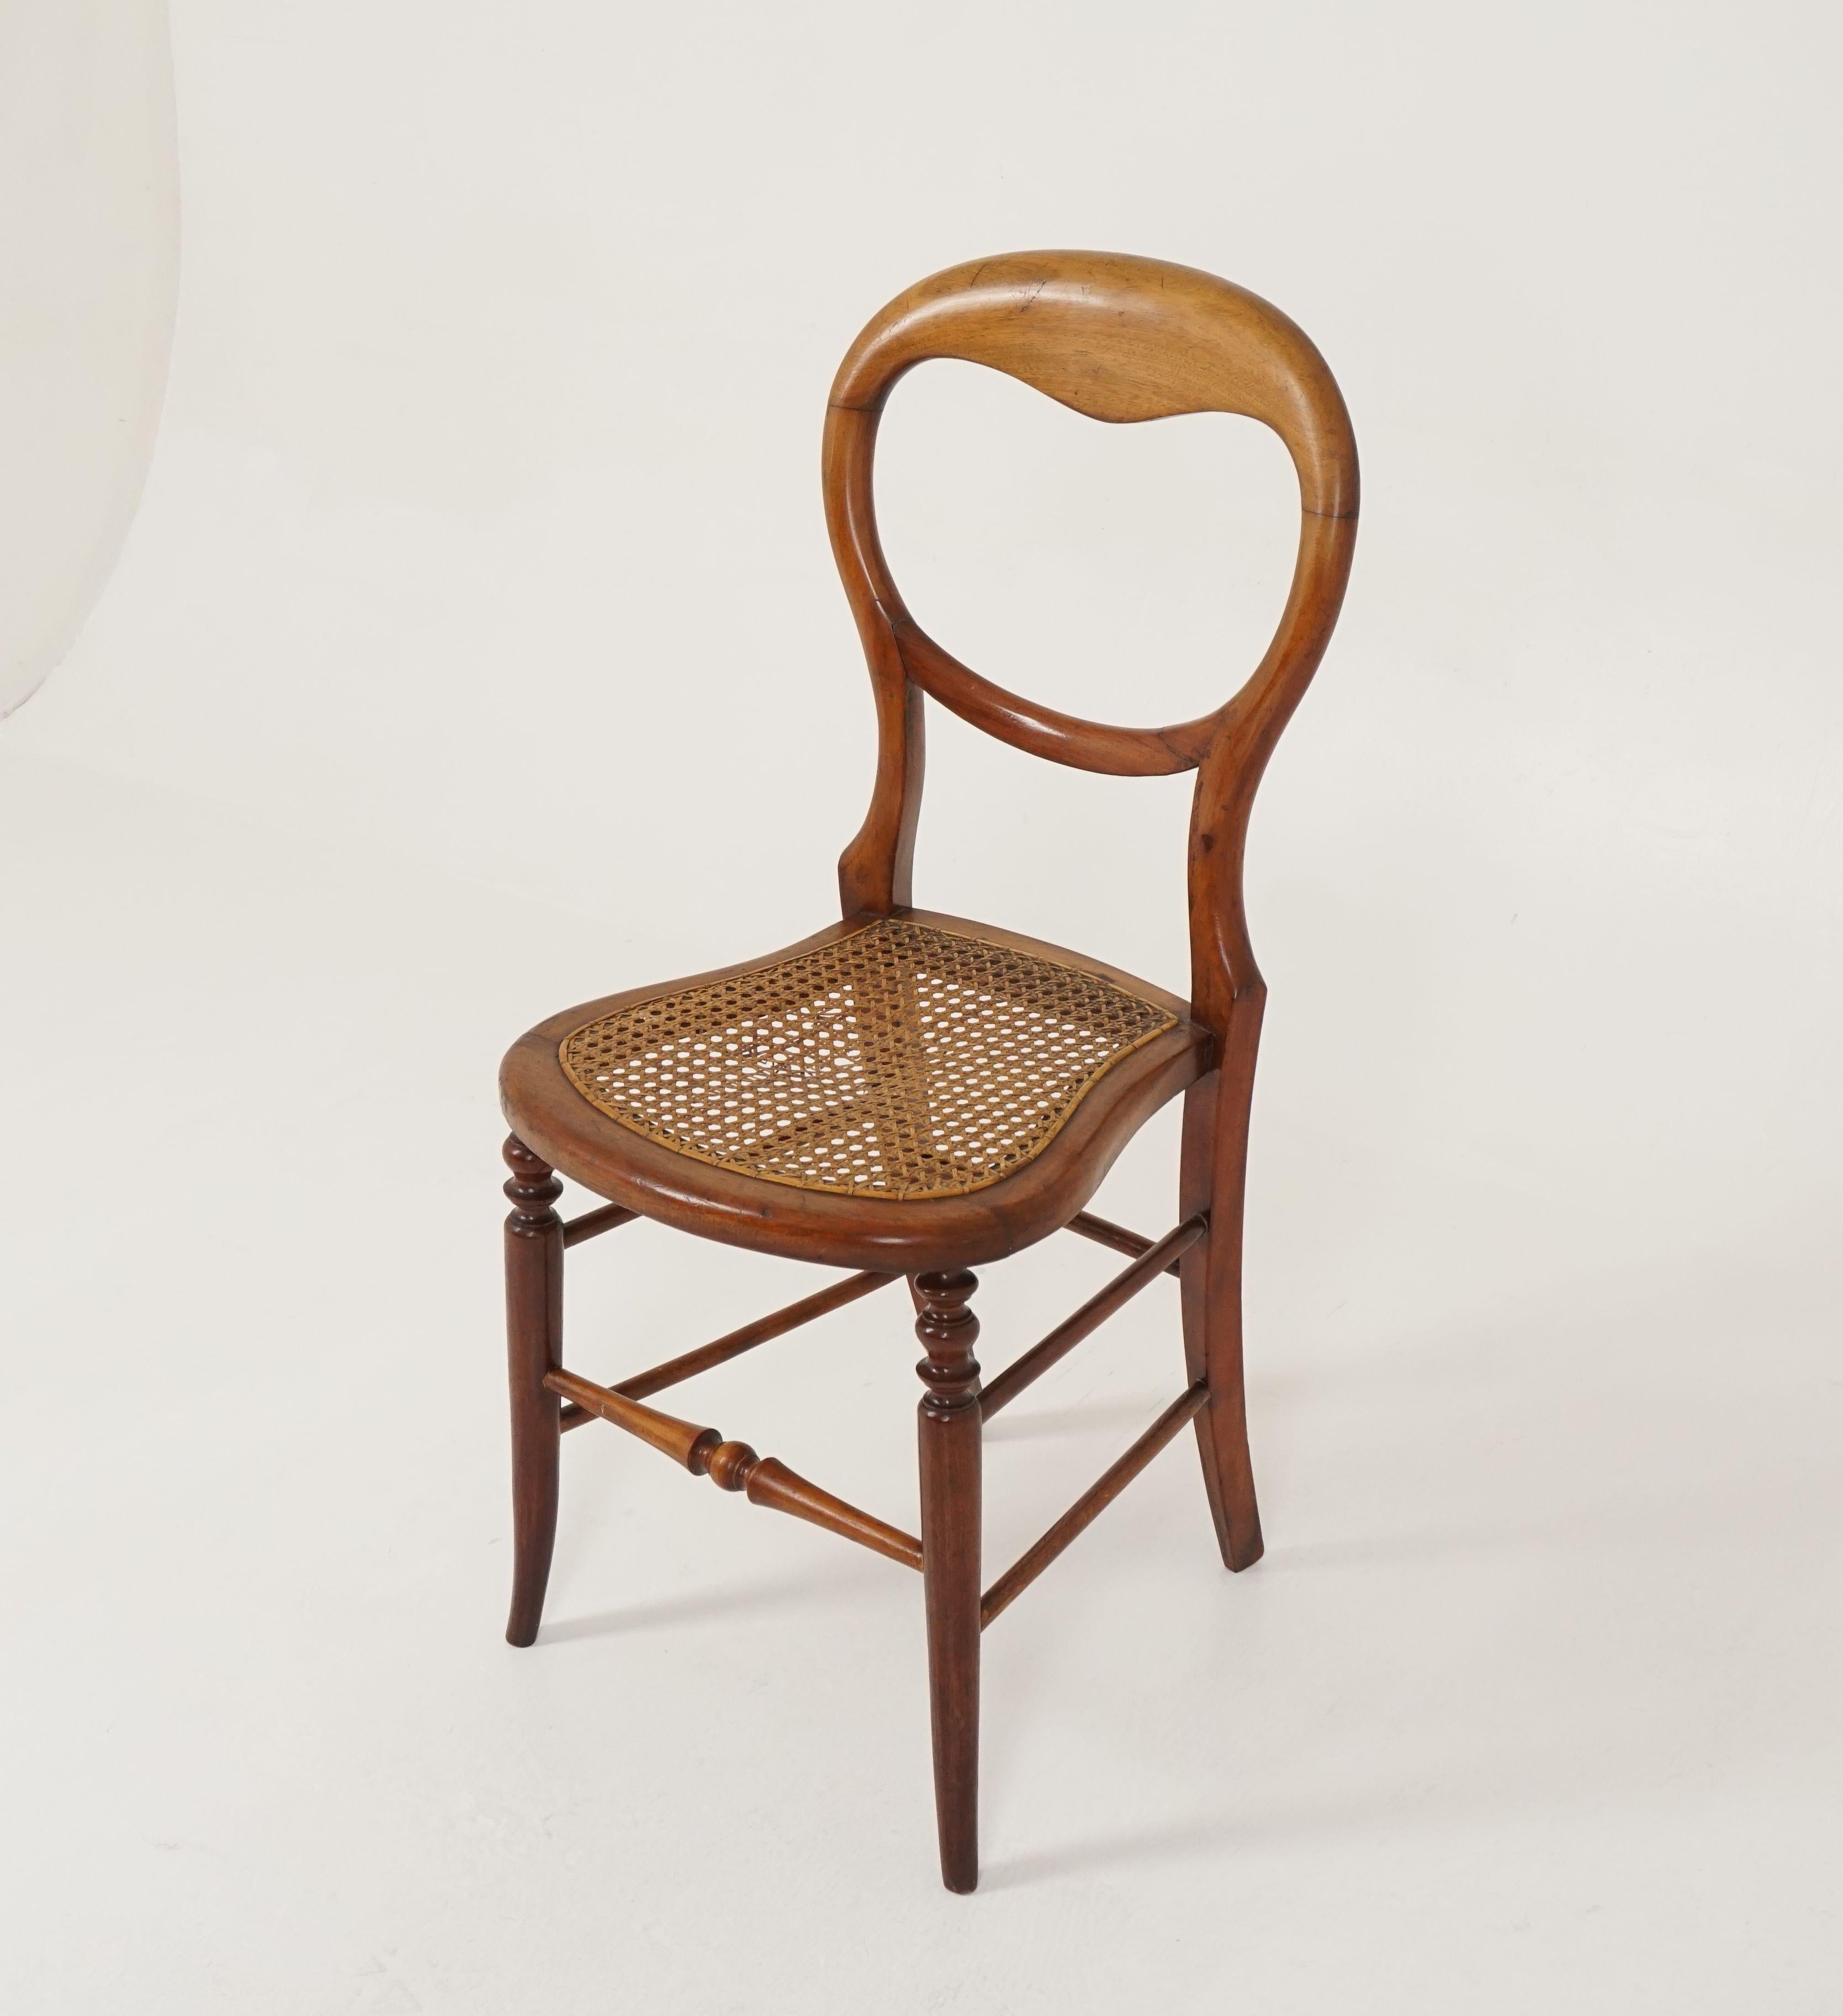 Antique victorian balloon back chair, Walnut bedroom chair, Scotland 1880, B2396A

Scotland 1880
Solid Walnut
Original finish
Shaped top rail
Shaped seat with original caning
Standing on a pair of turned splayed legs
Connected by double turned